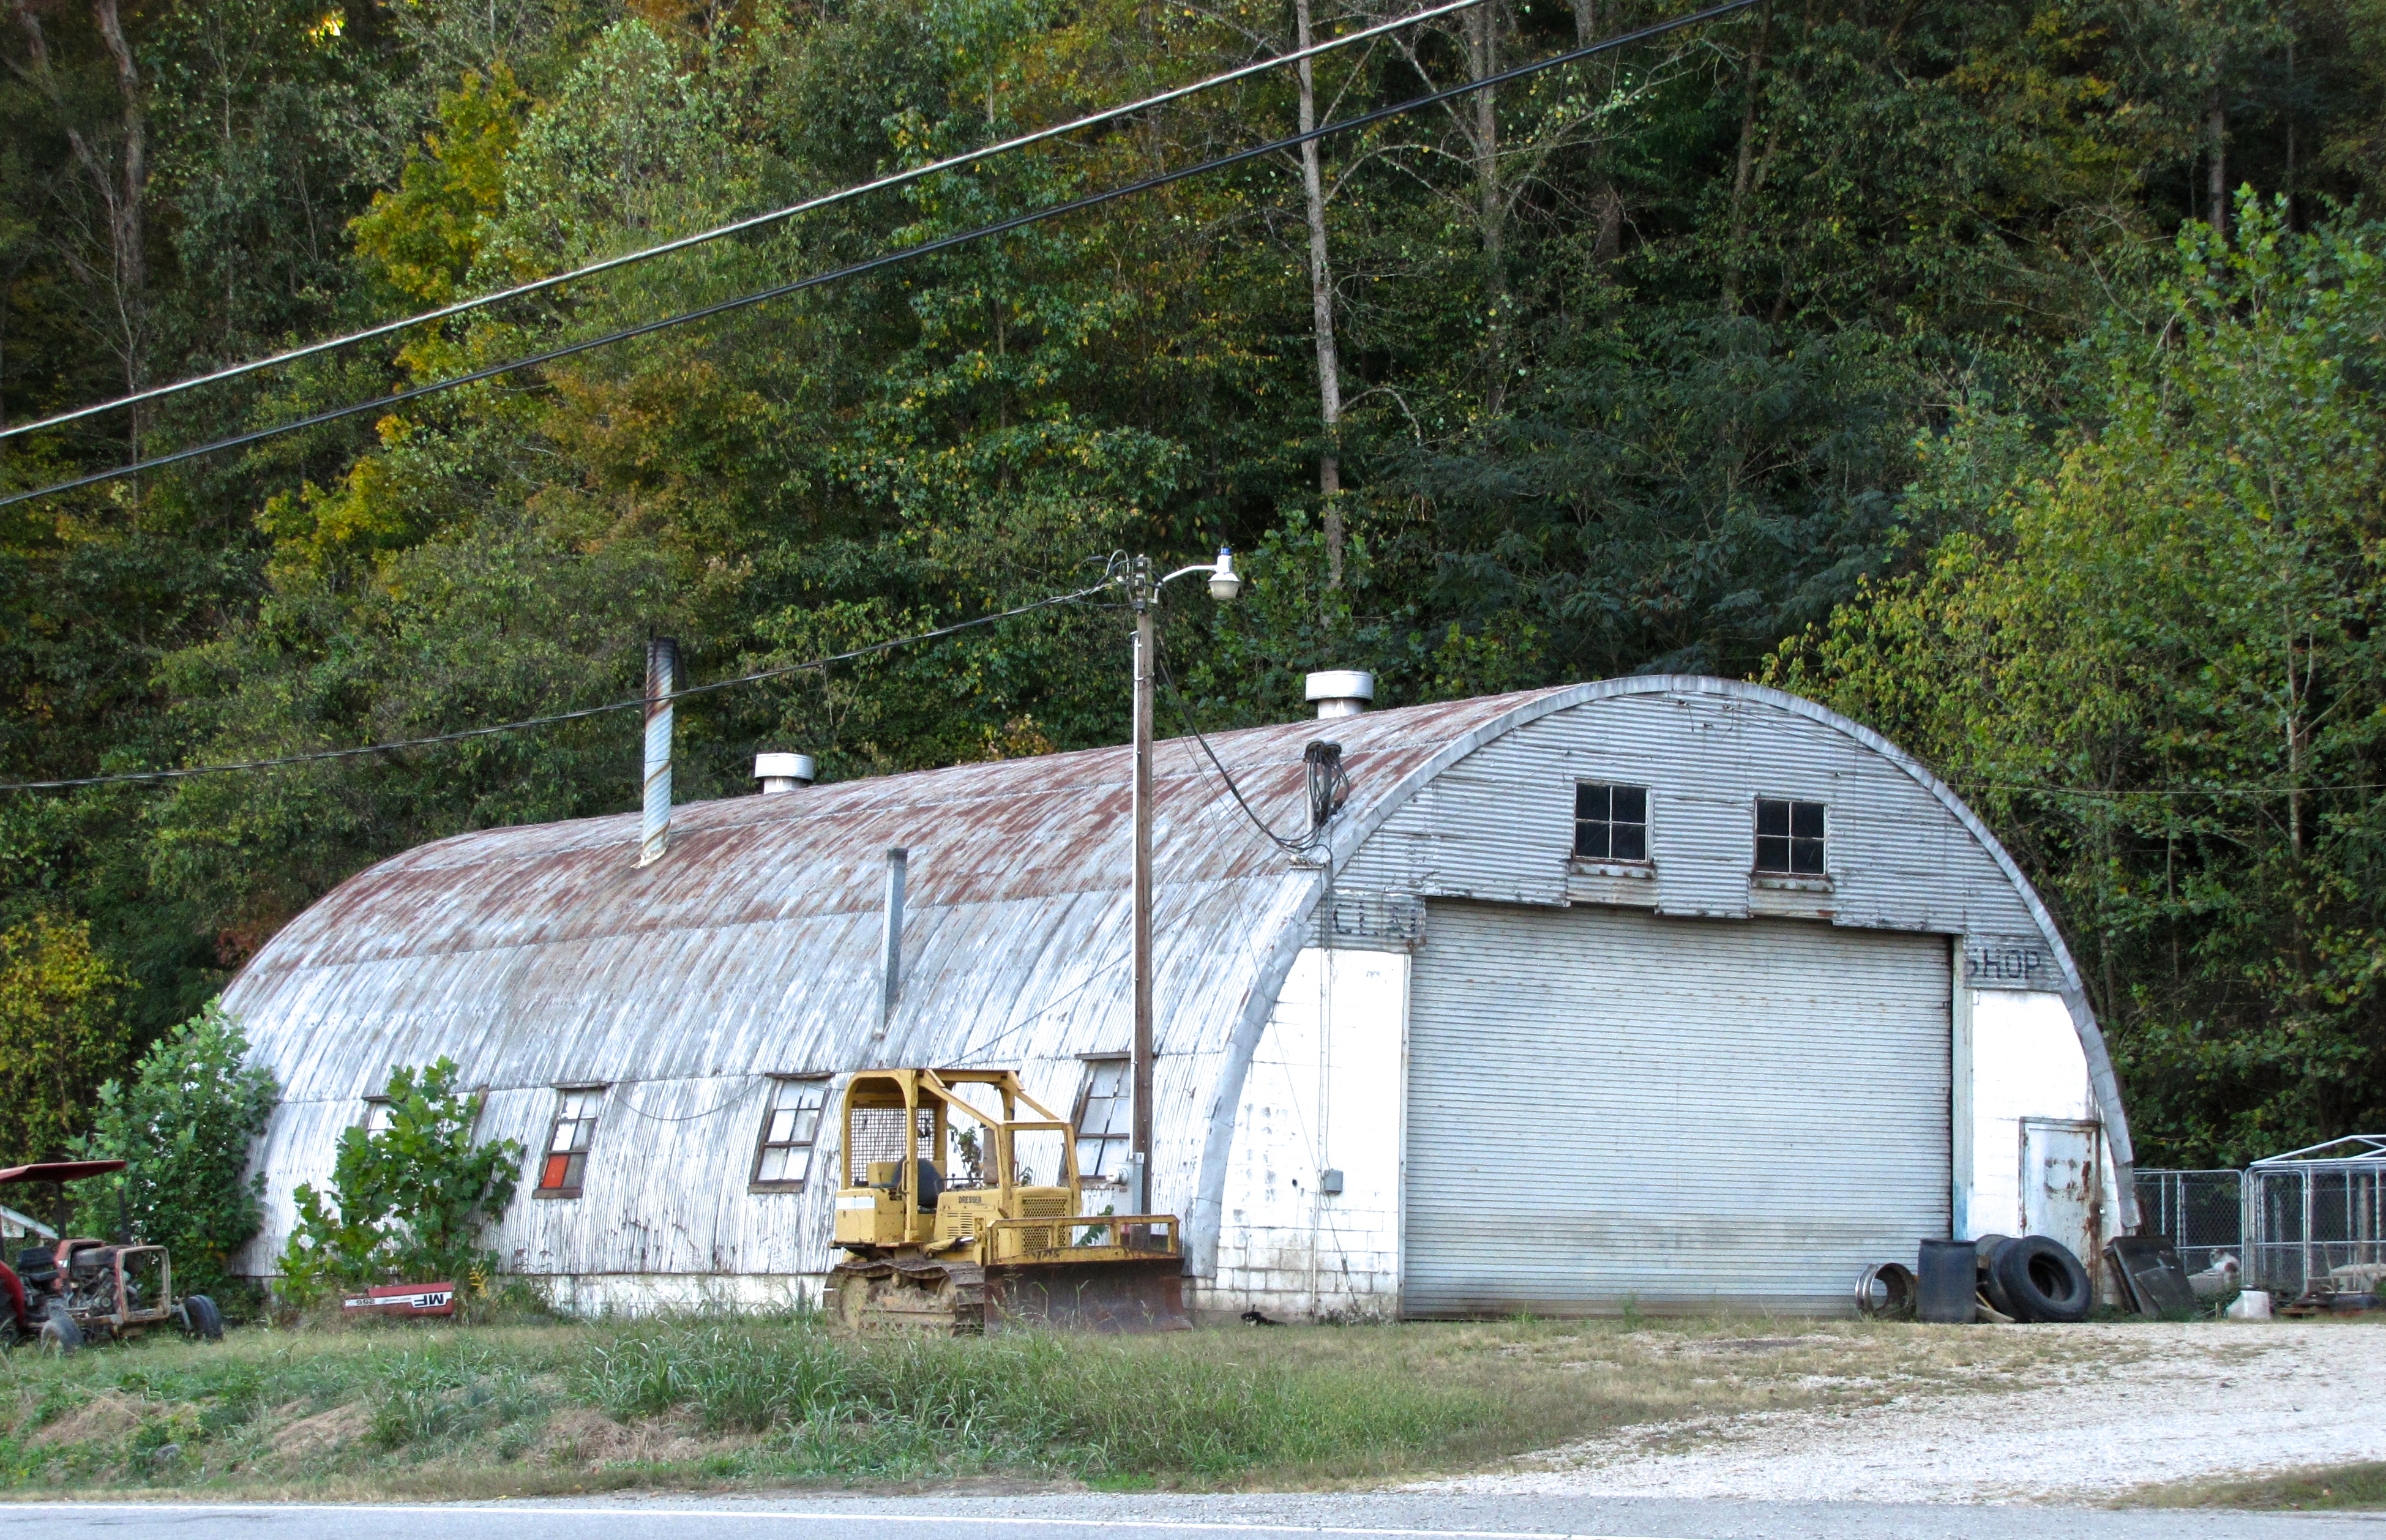 quonset hut in Charlotte, NC